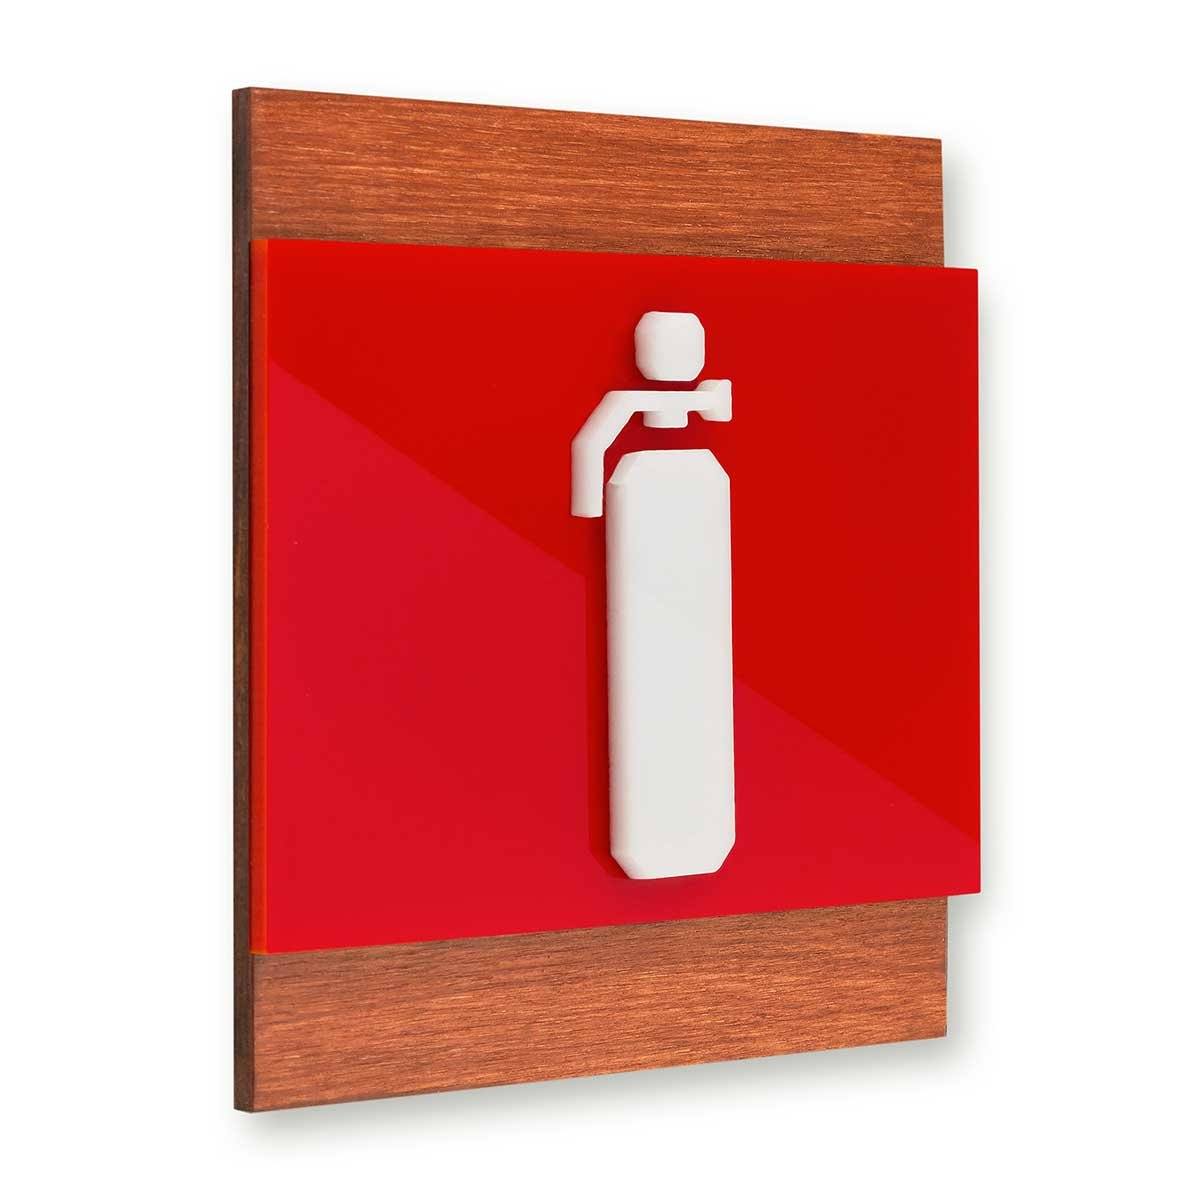 Extinguisher Fire Safety Wooden Wall Sign Information signs Redwood Bsign